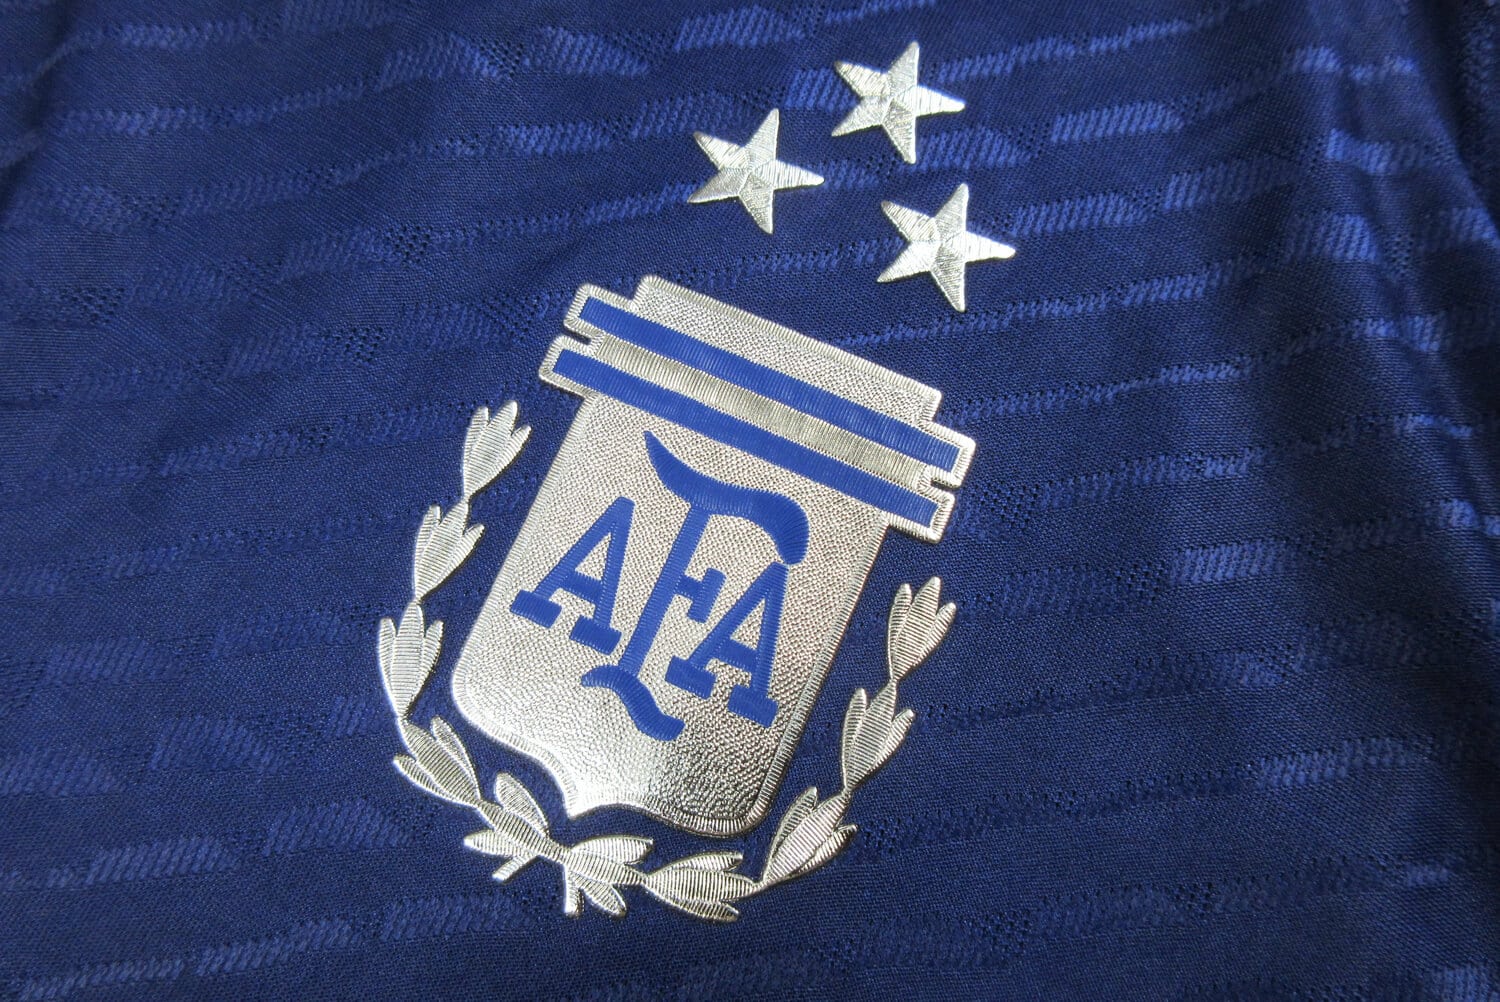 Argentina 2022 (Away) Three Stars + World Cup Champion Badge – Boutique  Soccer